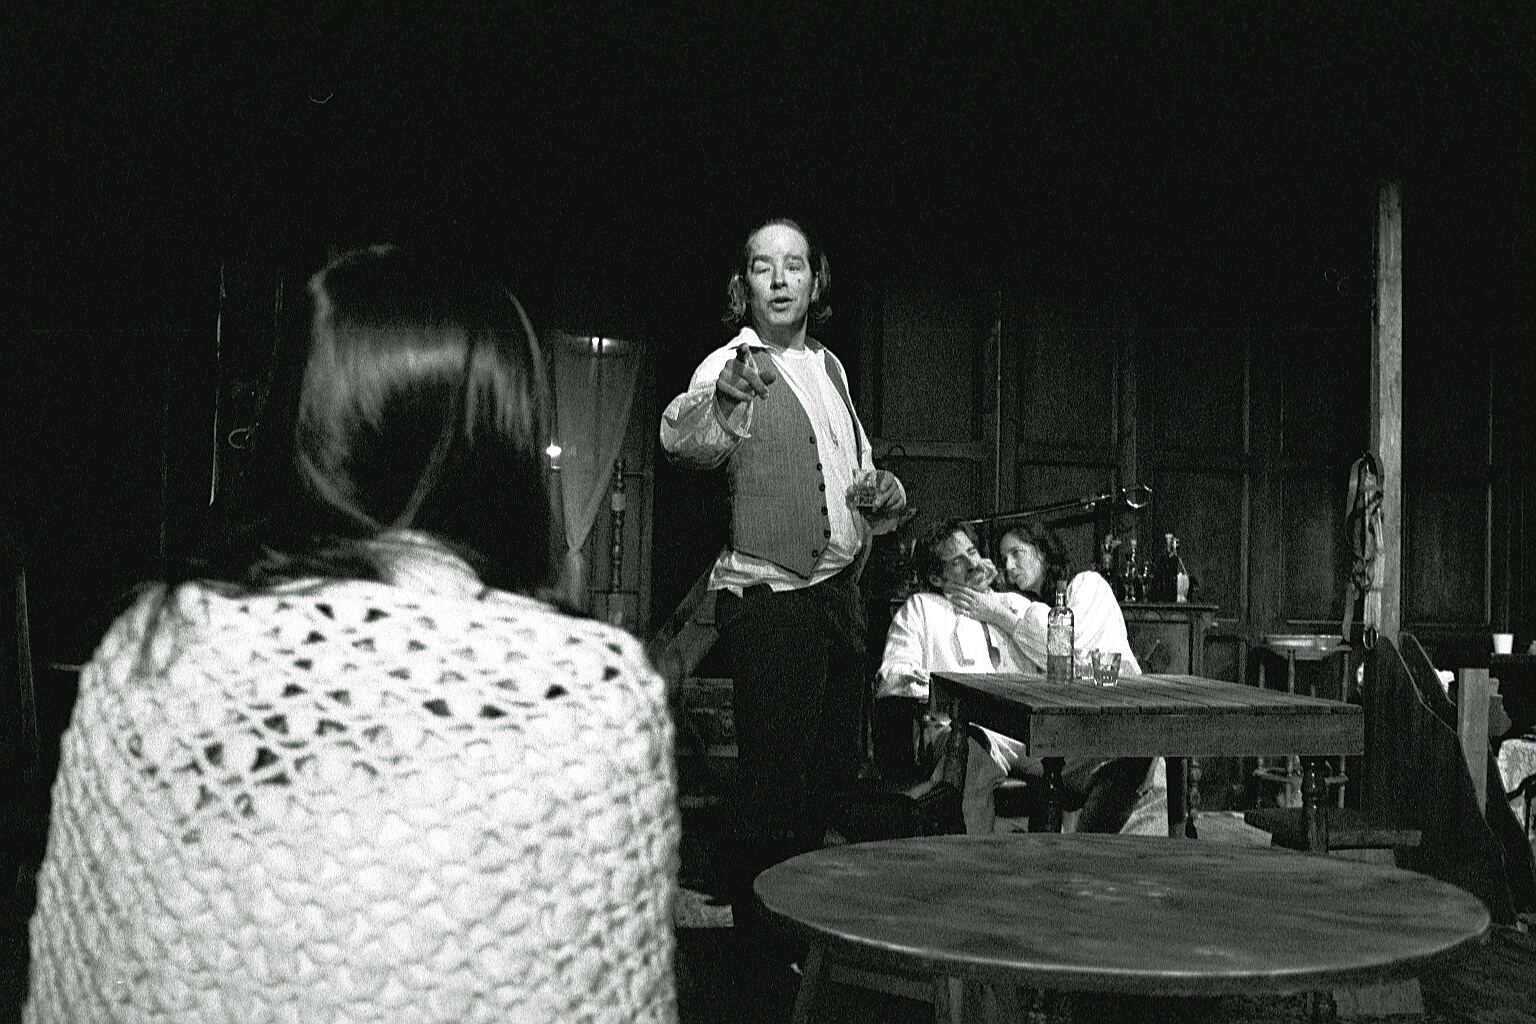 Adrienne Mays, TJ Langley, Philip D. Clarke, and Erin Day in A Touch of the Poet